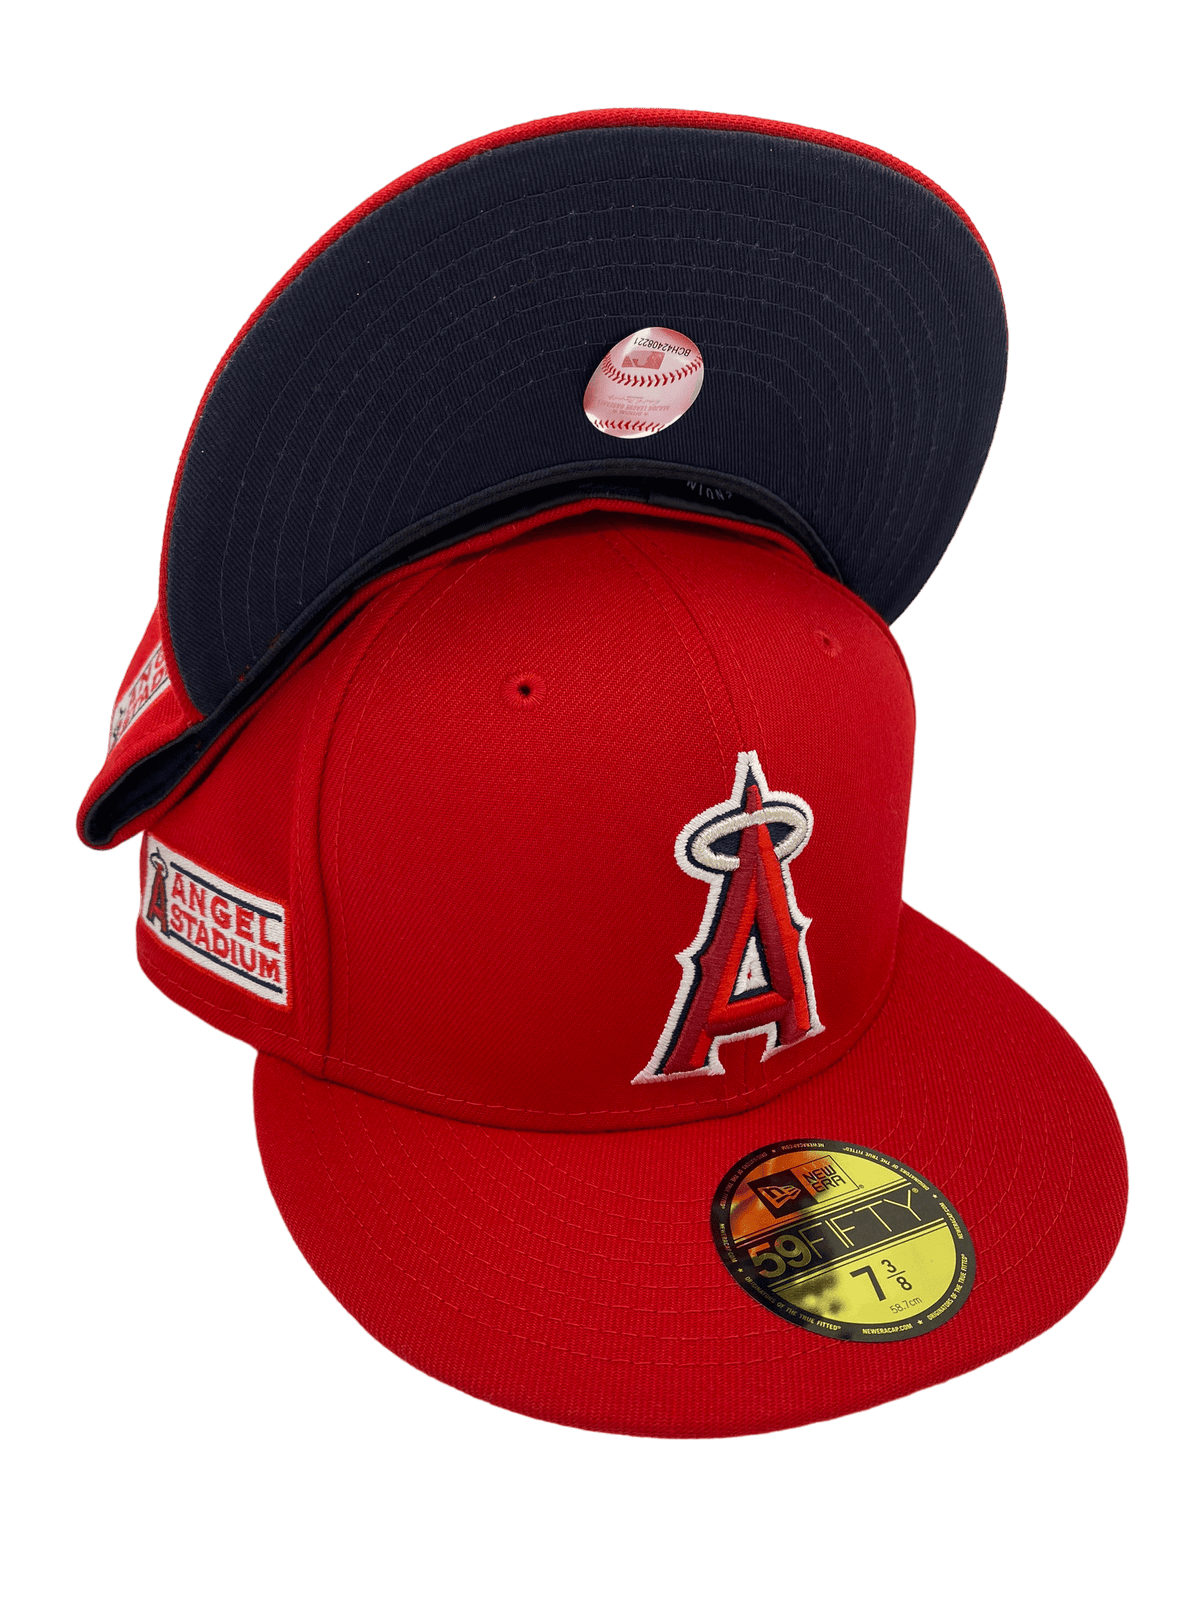 Anaheim Angels A City Connect New Era 59FIFTY Fitted Hat (Chrome White Black Red Under BRIM) 7 7/8